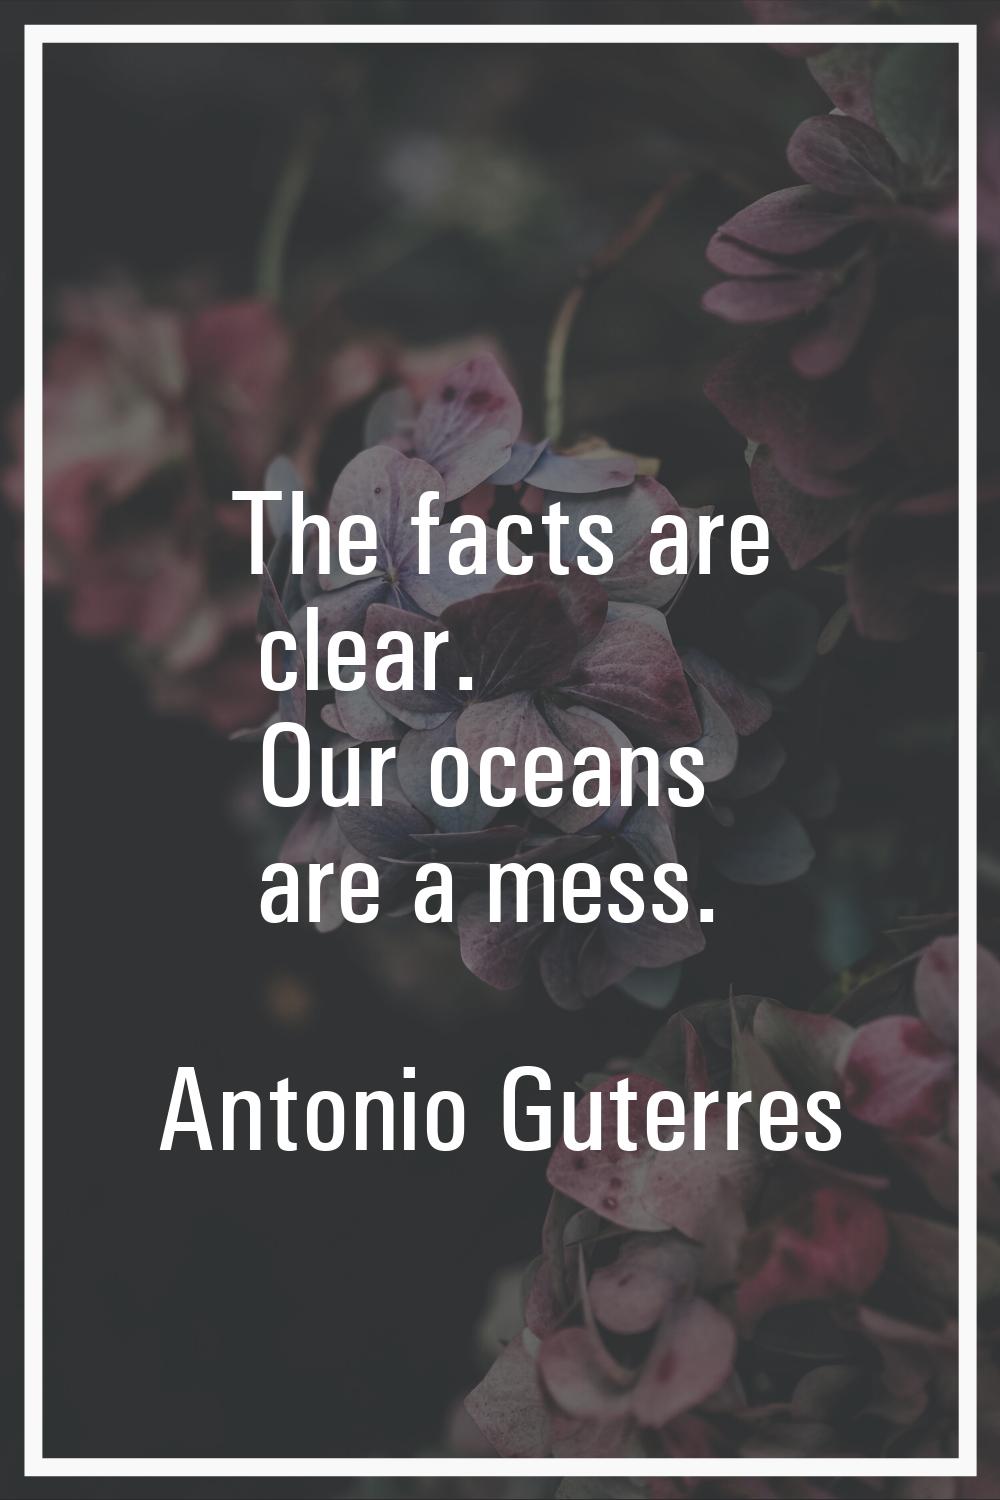 The facts are clear. Our oceans are a mess.